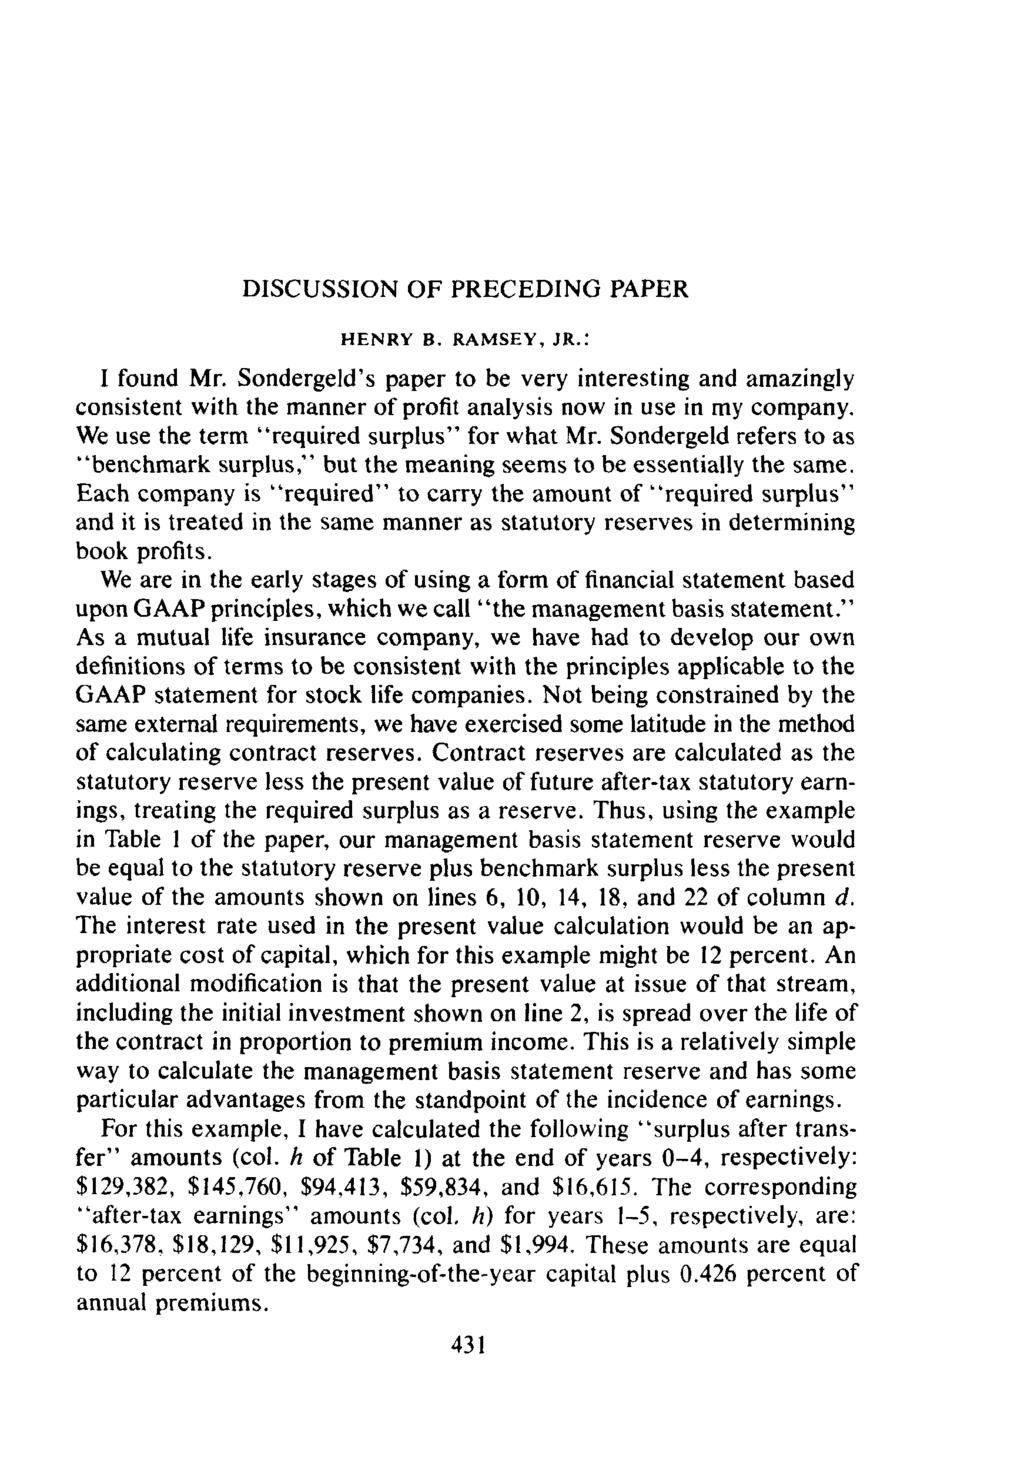 DISCUSSION OF PRECEDING PAPER HENRY B. RAMSEY, JR.." I found Mr. Sondergeld's paper to be very interesting and amazingly consistent with the manner of profit analysis now in use in my company.